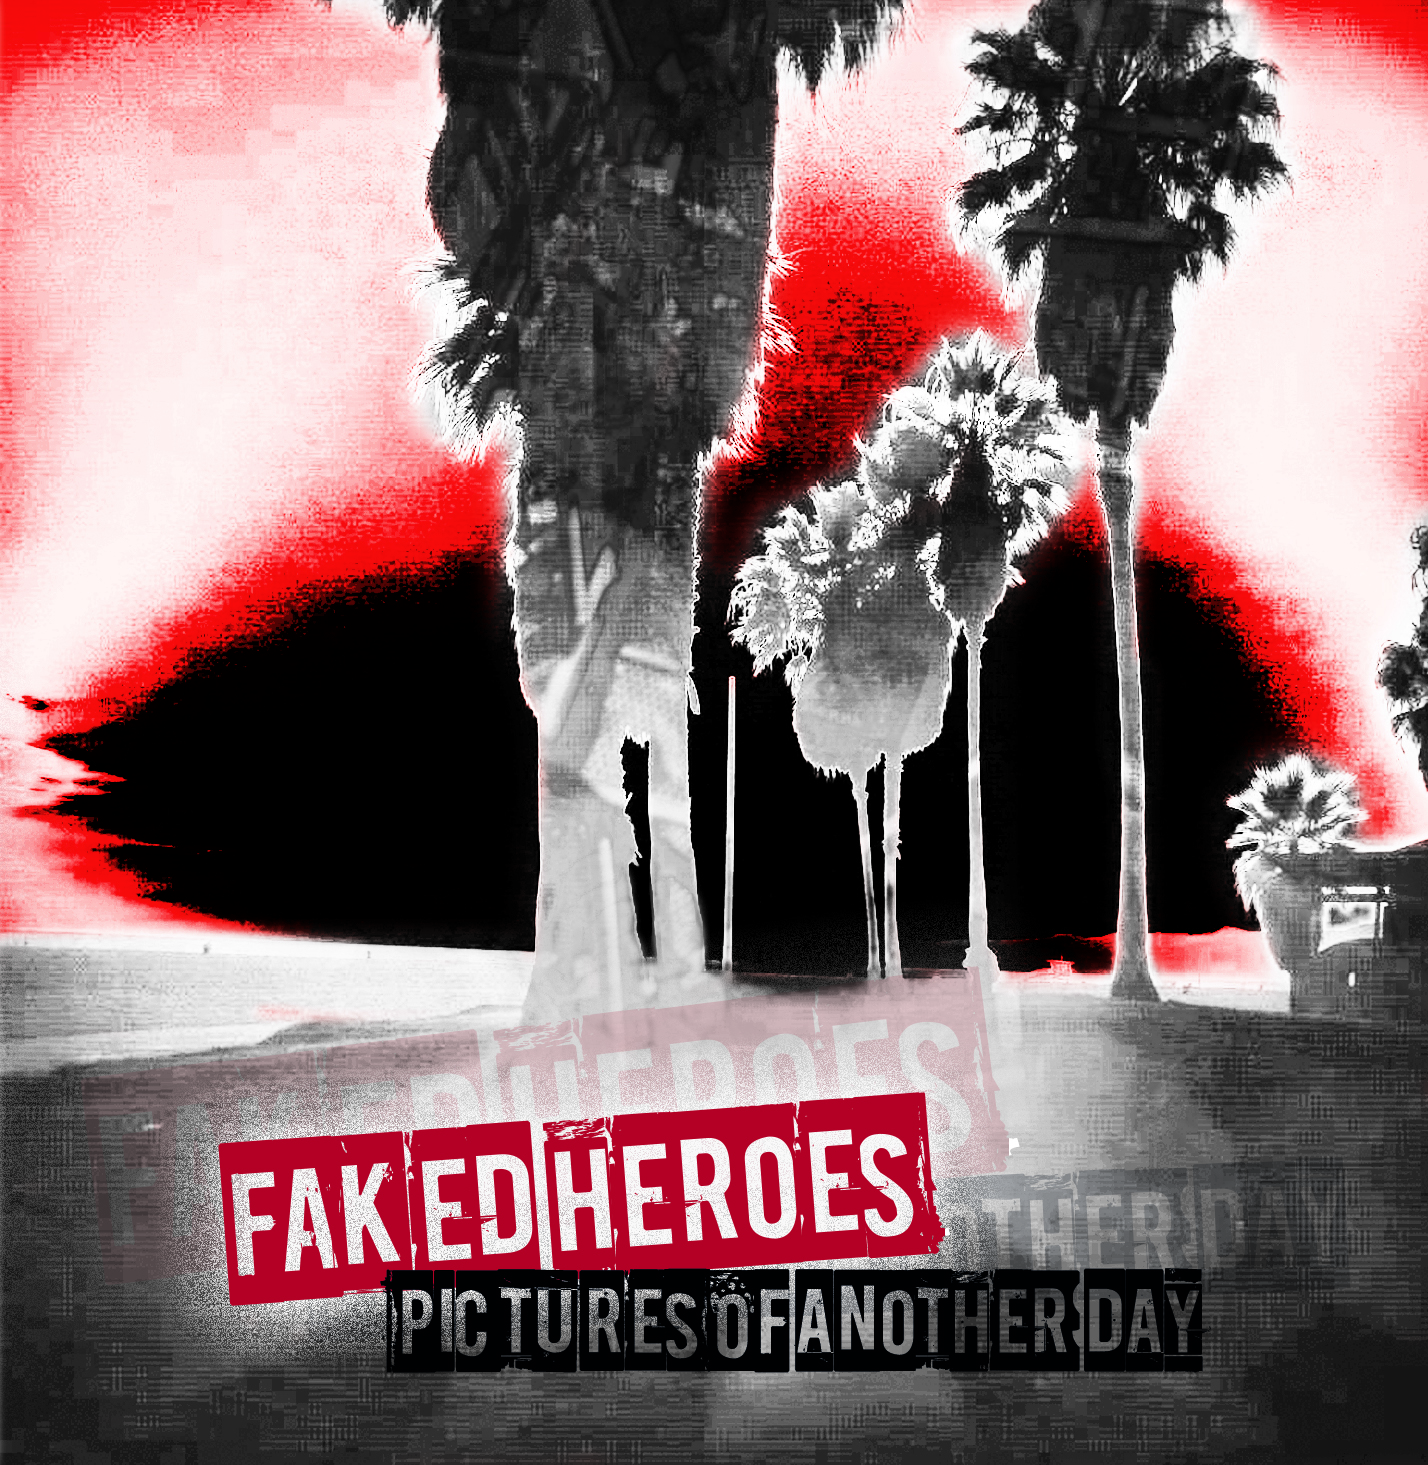 faked-heroes-album-cover-pictures-of-another-day-portfolio-image